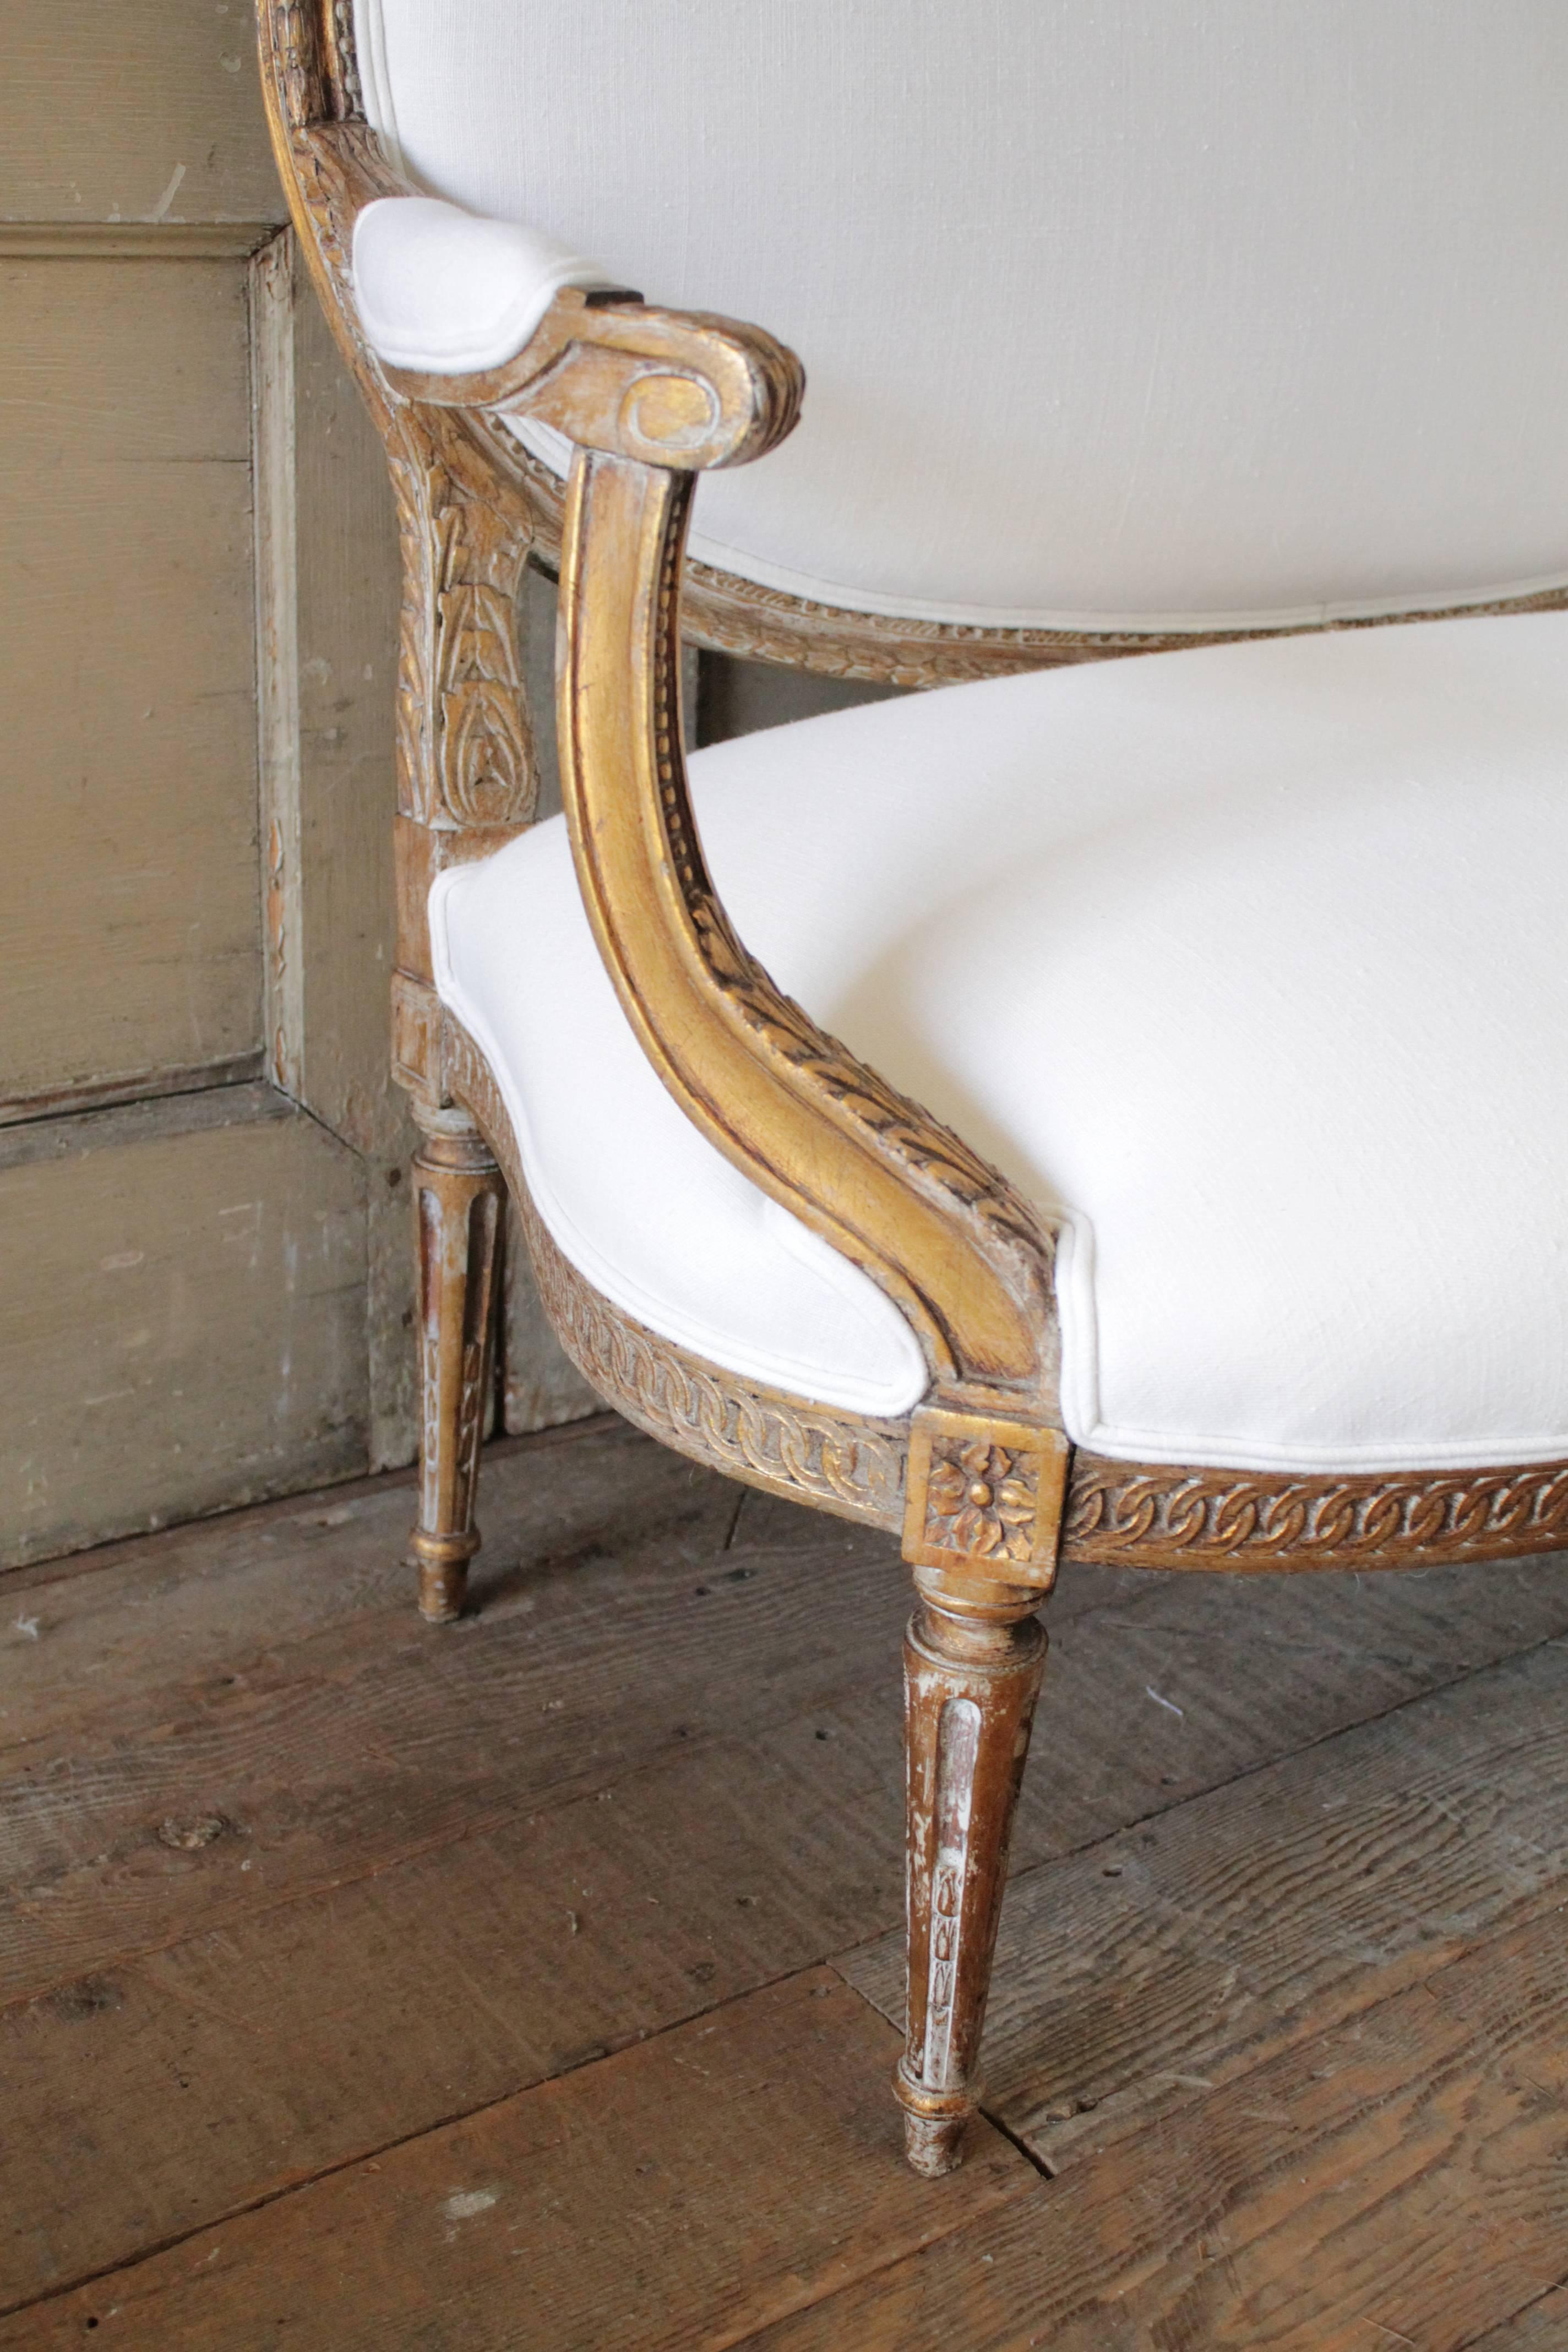 Carved Louis XVI Style Giltwood Settee Upholstered in White Irish Linen